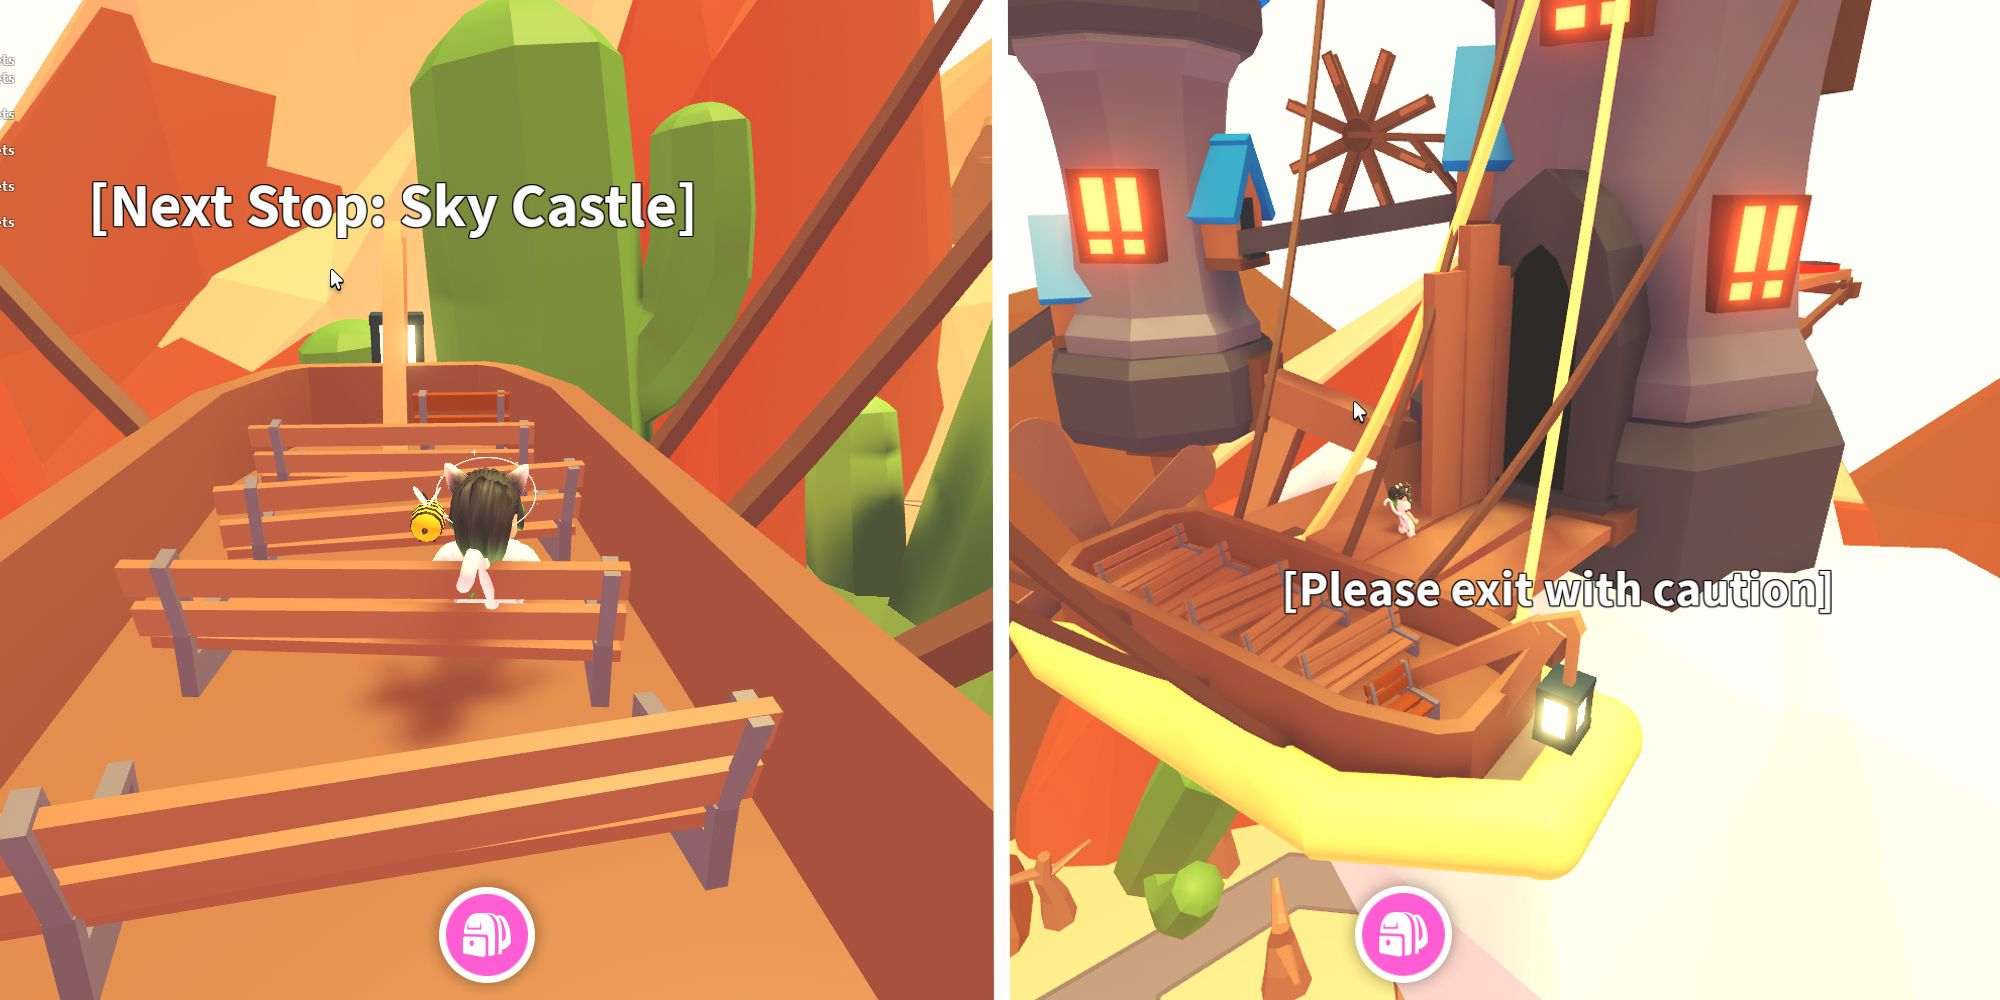 image of player in hot air balloon next to image of exterior of sky castle